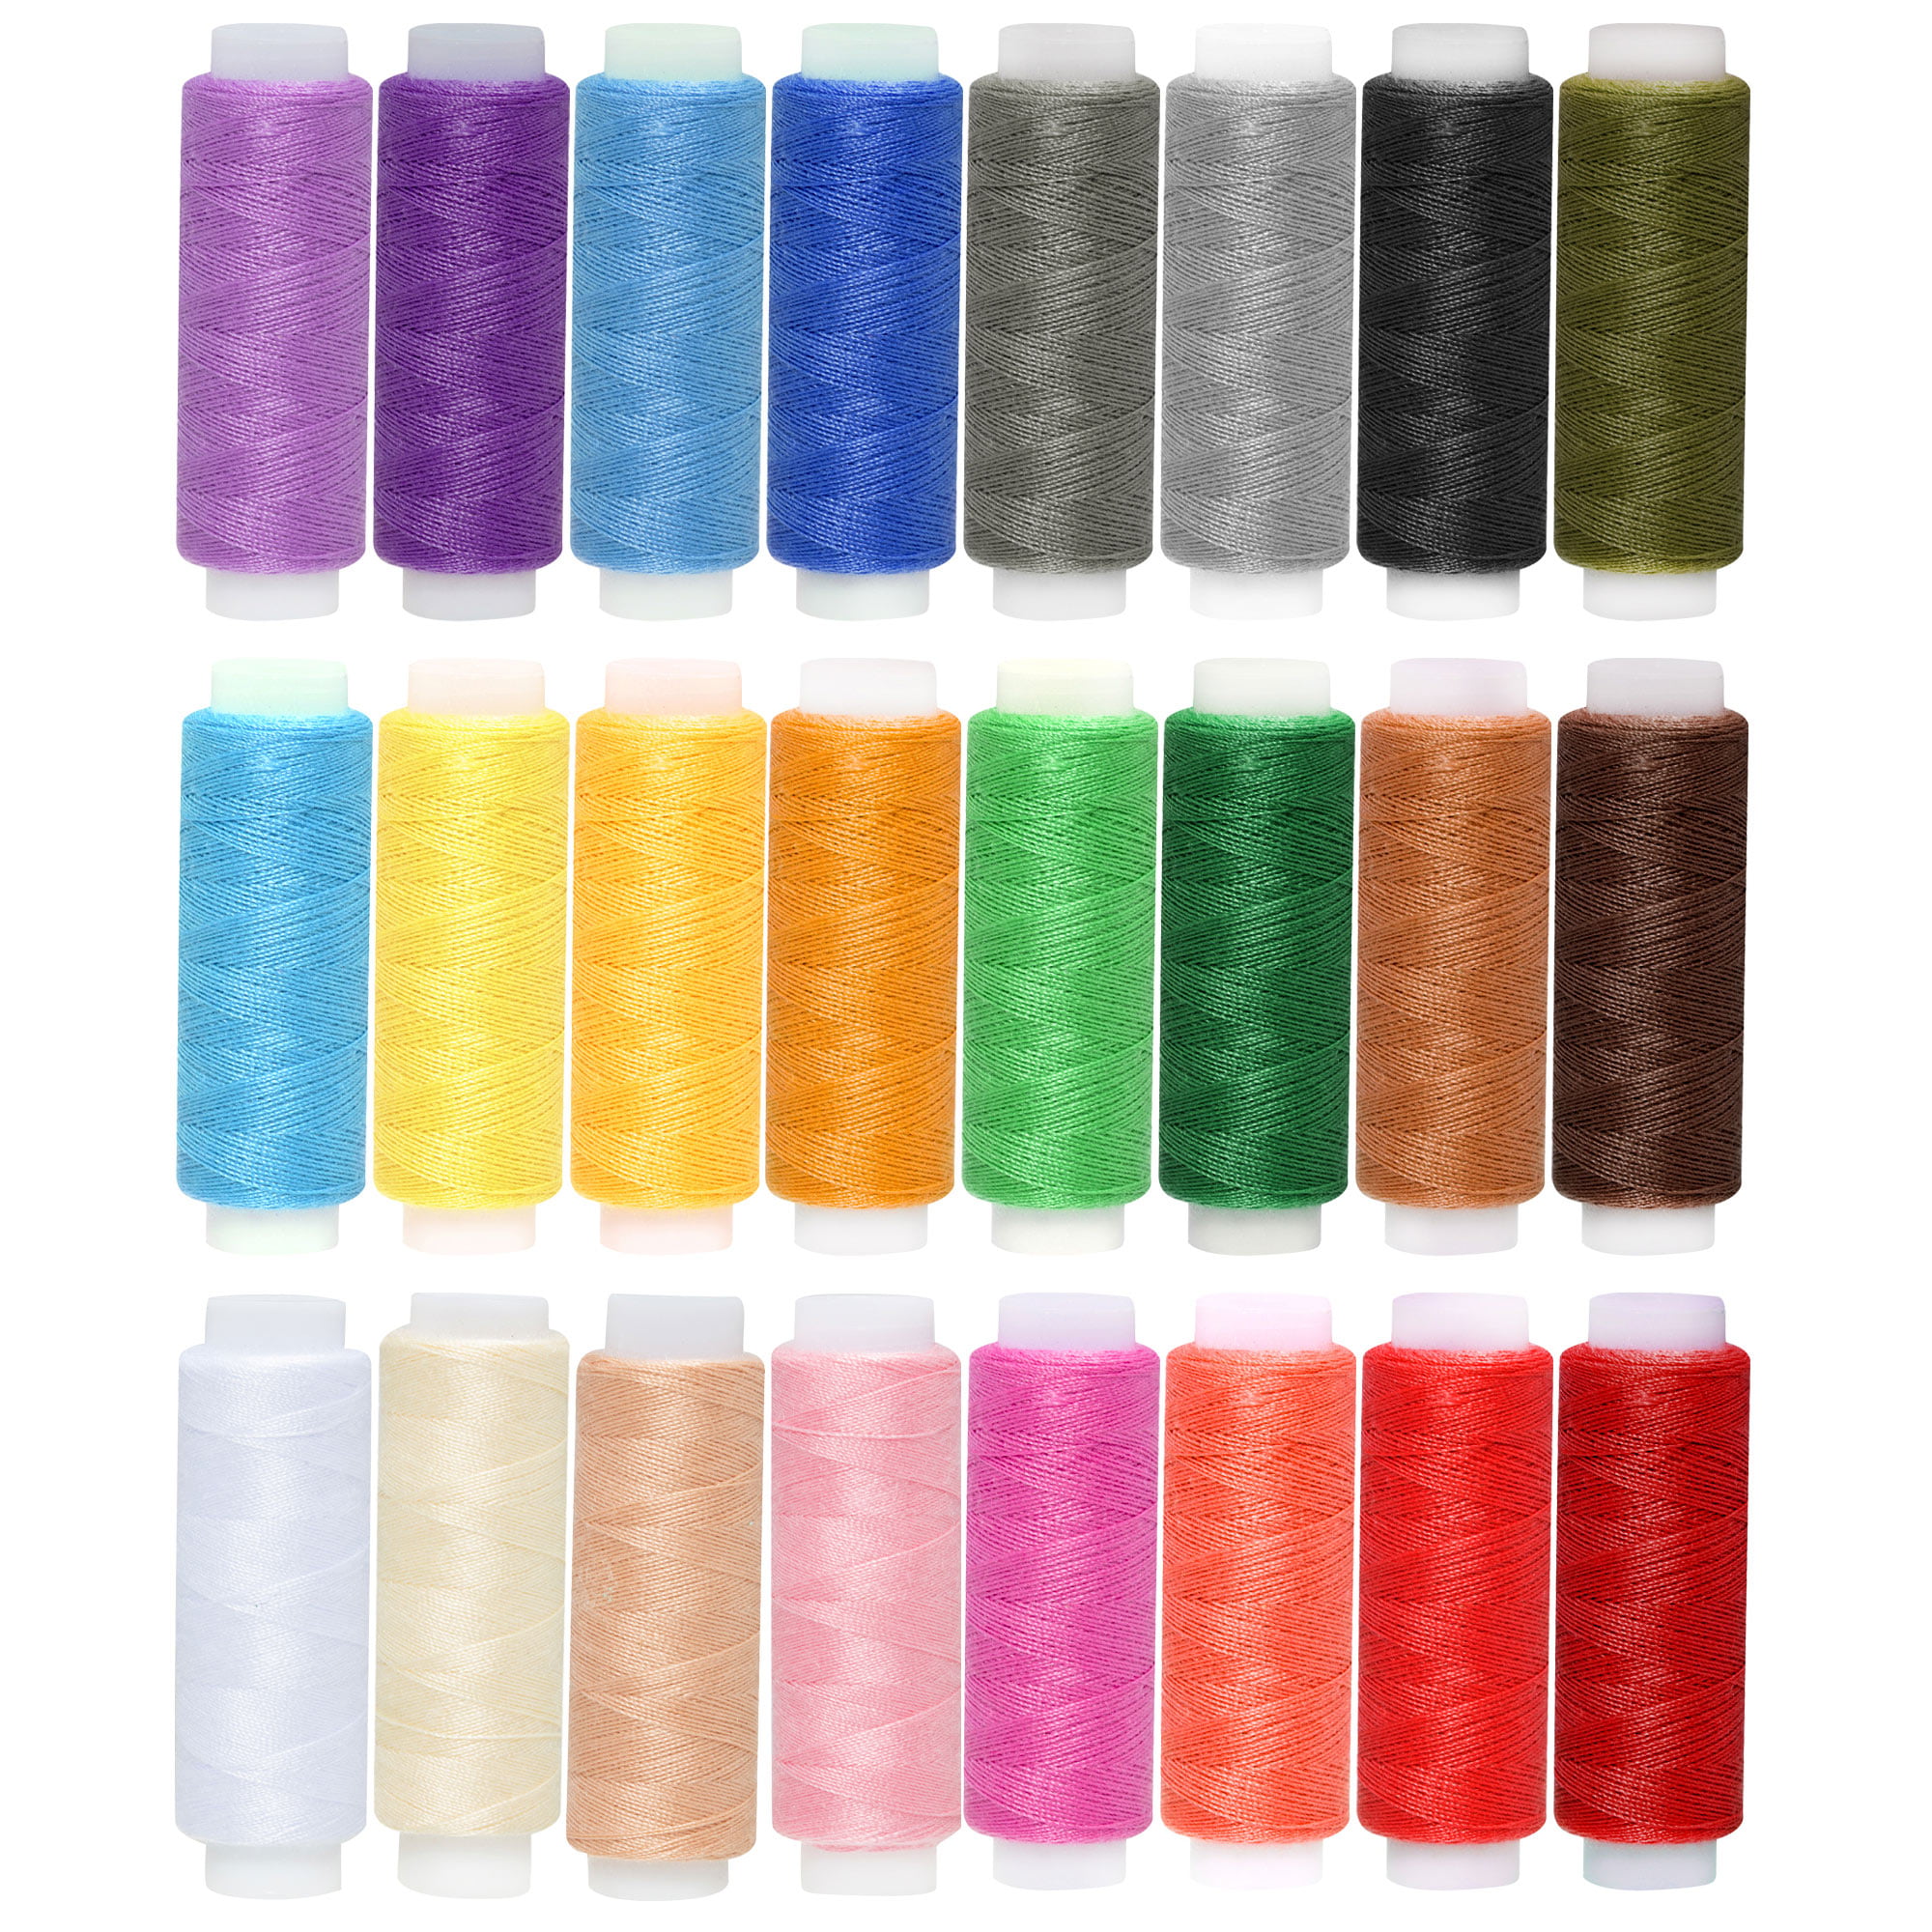 5pcs Sewing Thread Set, Rainbow Polyester Sewing Thread Kit Iridescent Hand  Machine Sewing String Spool for Hand Sewing Embroidery Quilting Stitching